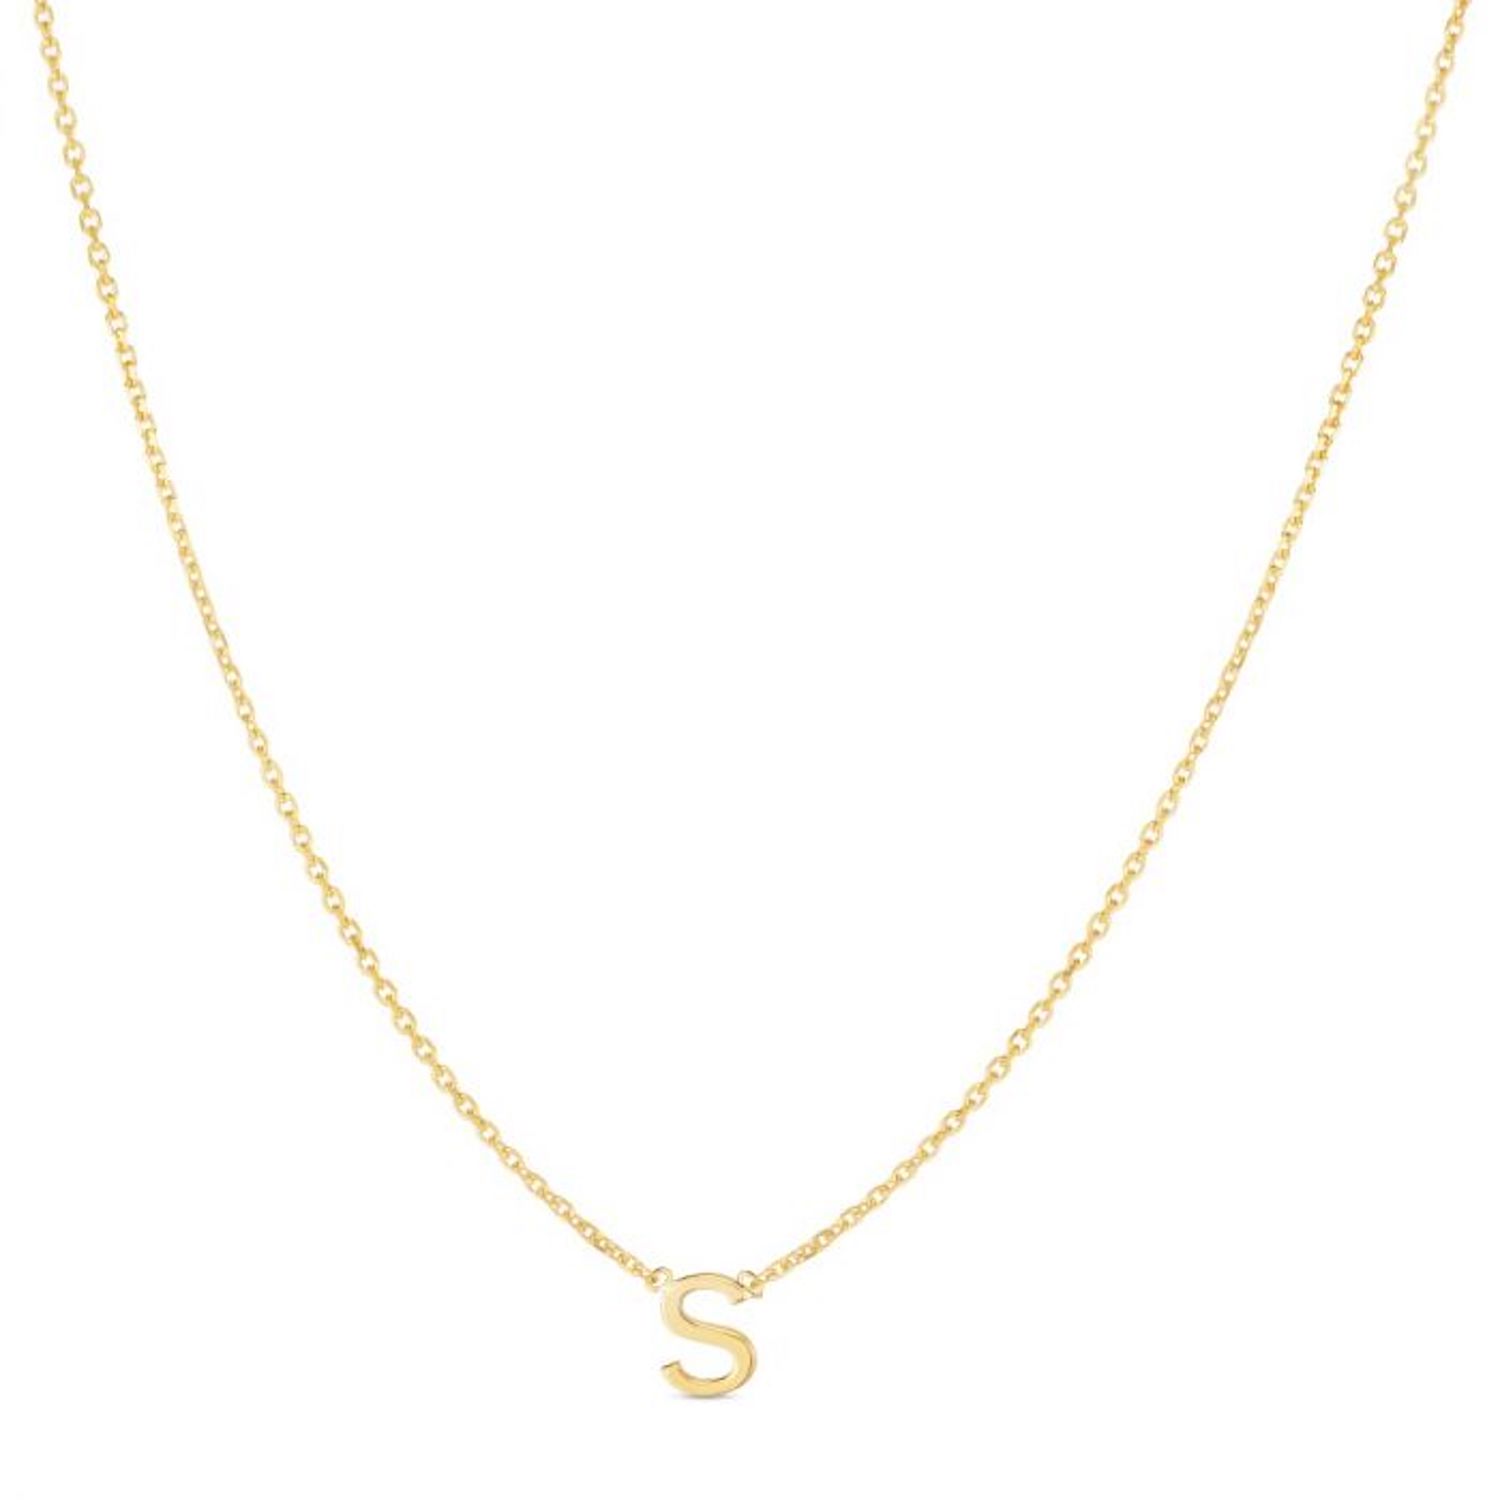 14K Yellow Gold Letter Initials Pendant Necklace 16"-18" - S